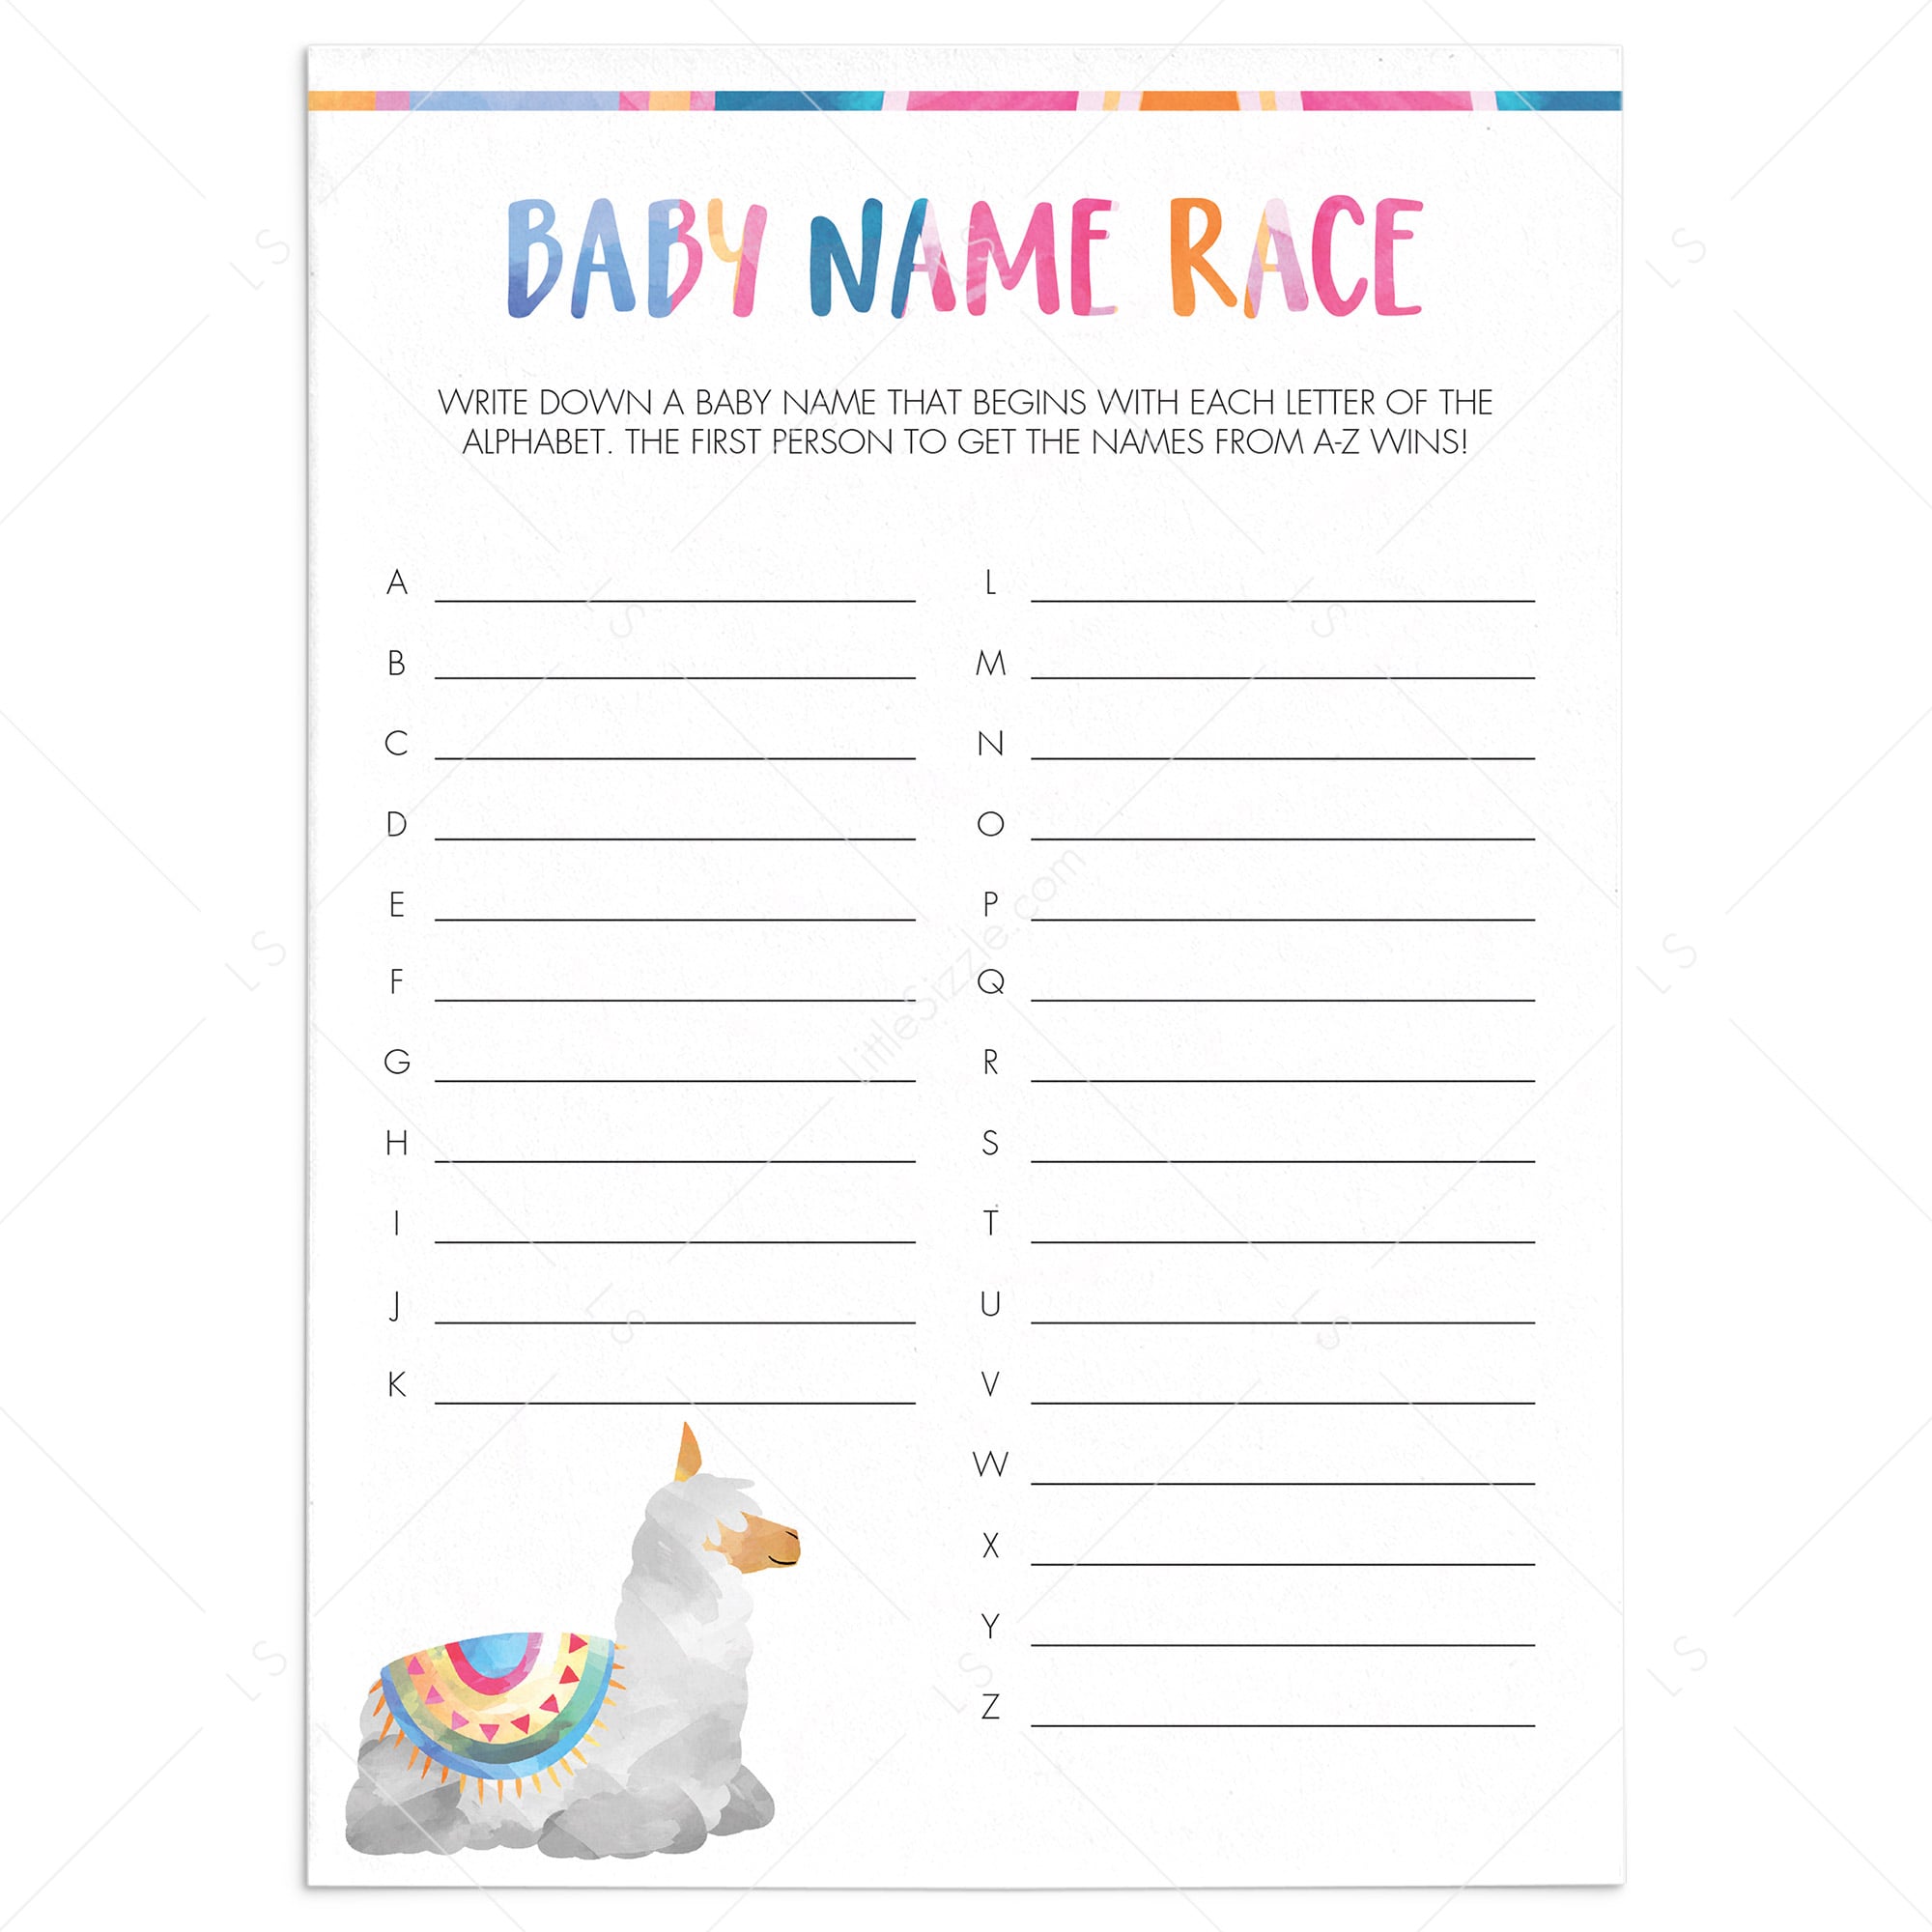 Baby Name Suggestions Game for Baby Shower Printable by LittleSizzle